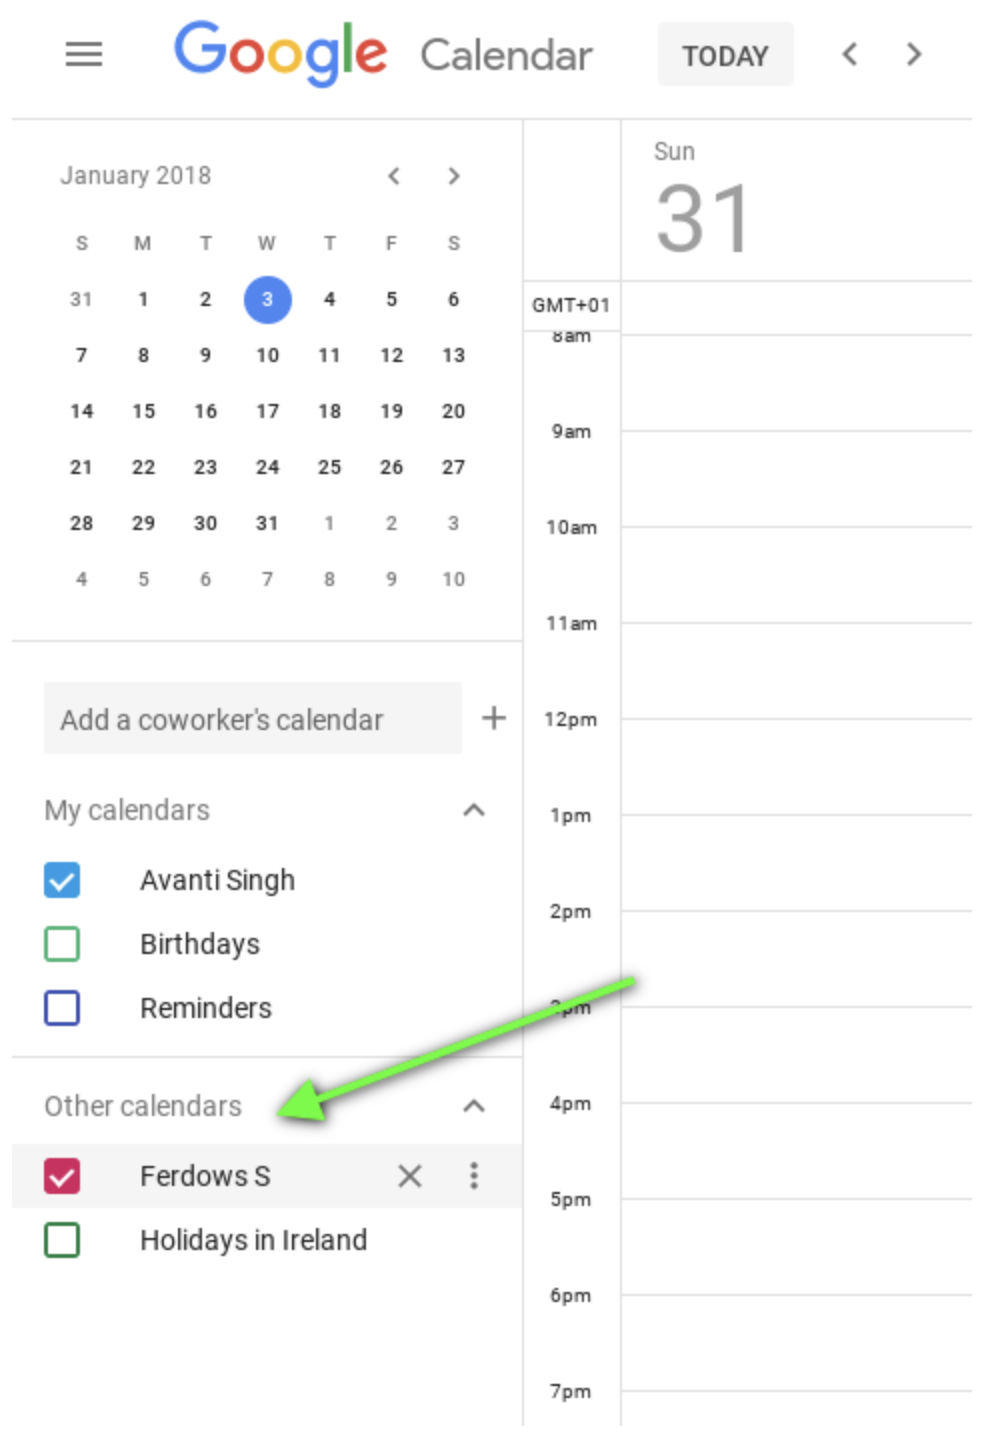 Calendar Audit: Add additional Owners to Any Existing Calendar